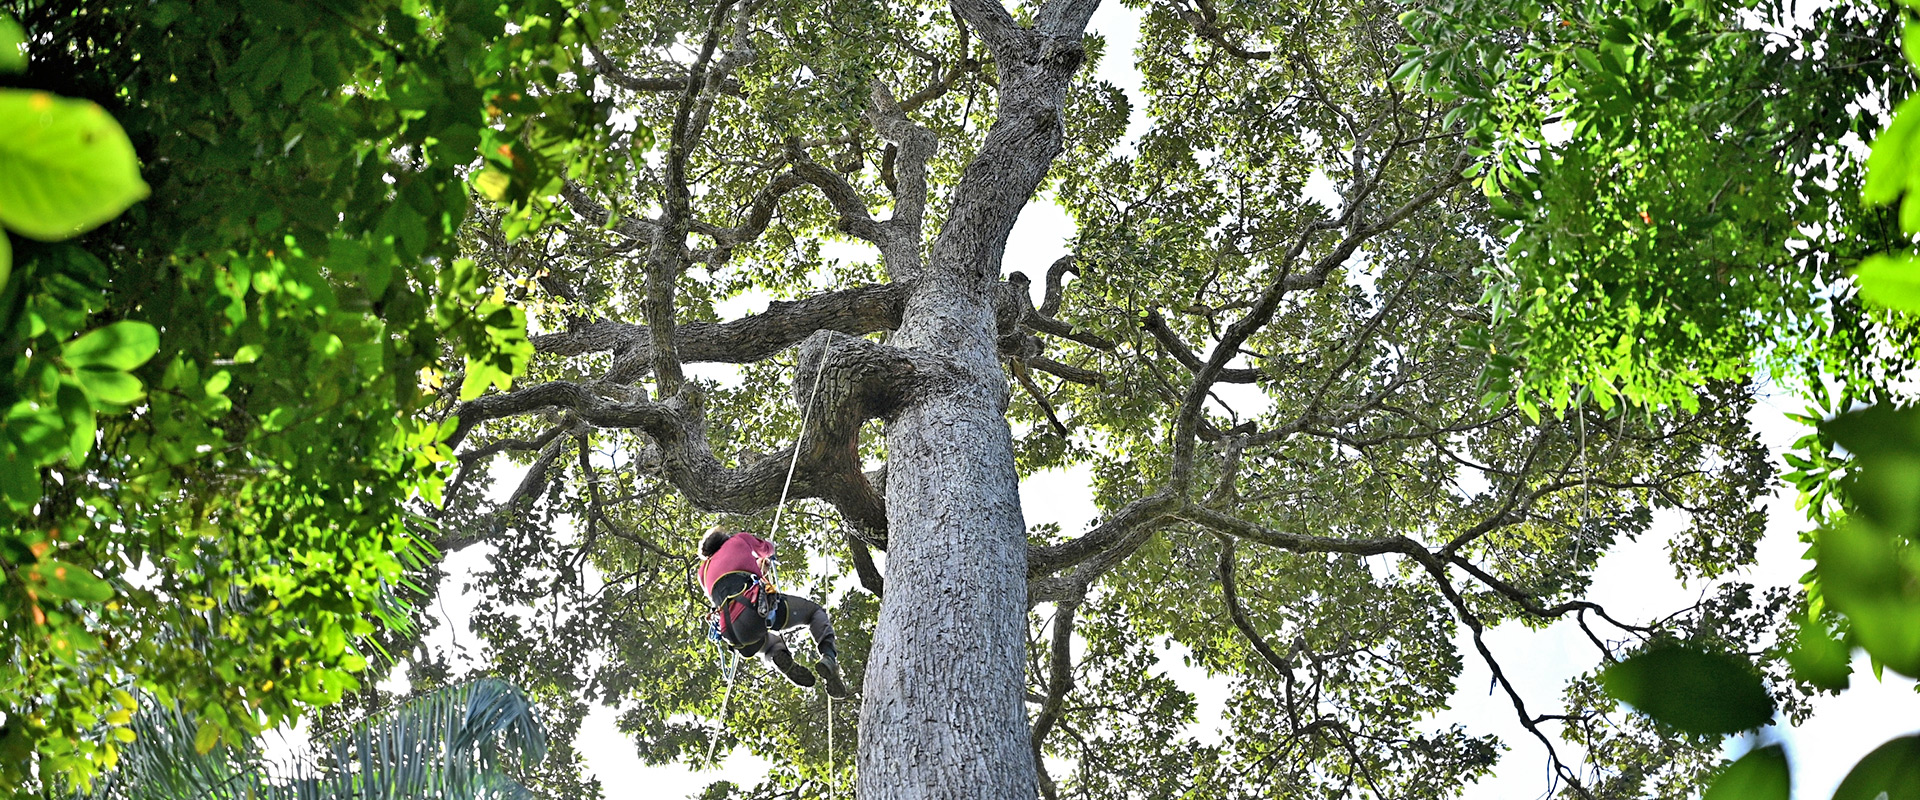 Canopy access to installing an artificial Great Hornbill nesting box